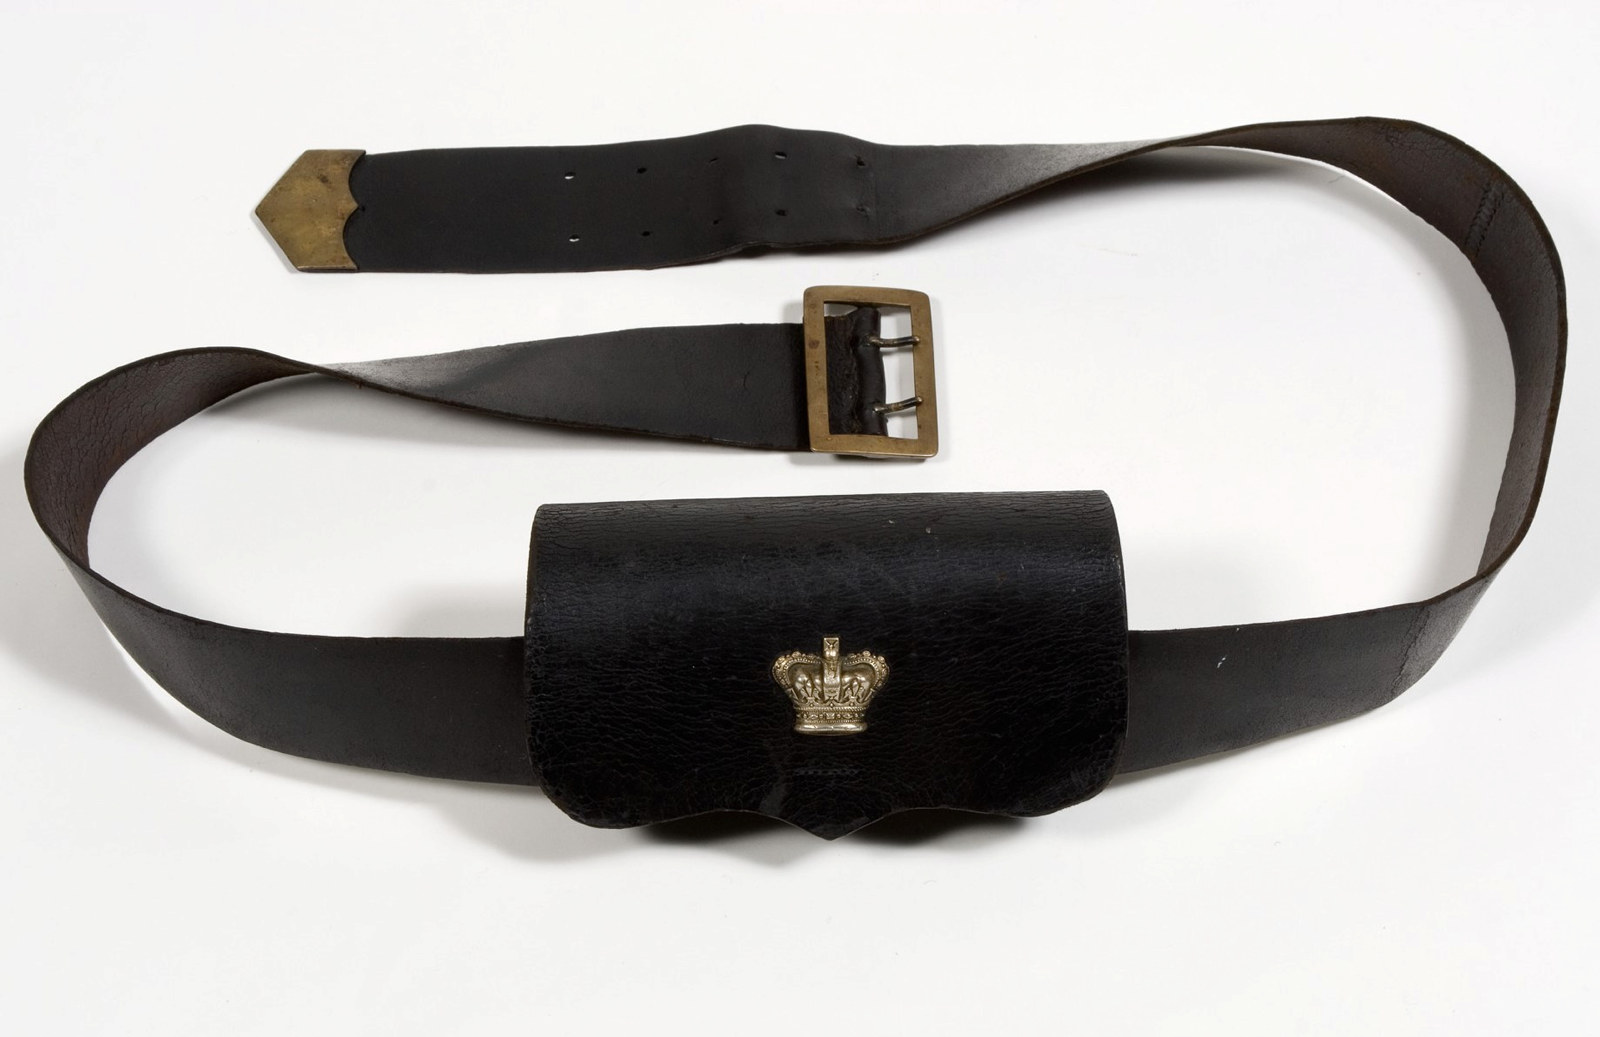 Leather ammunition pouch used by police